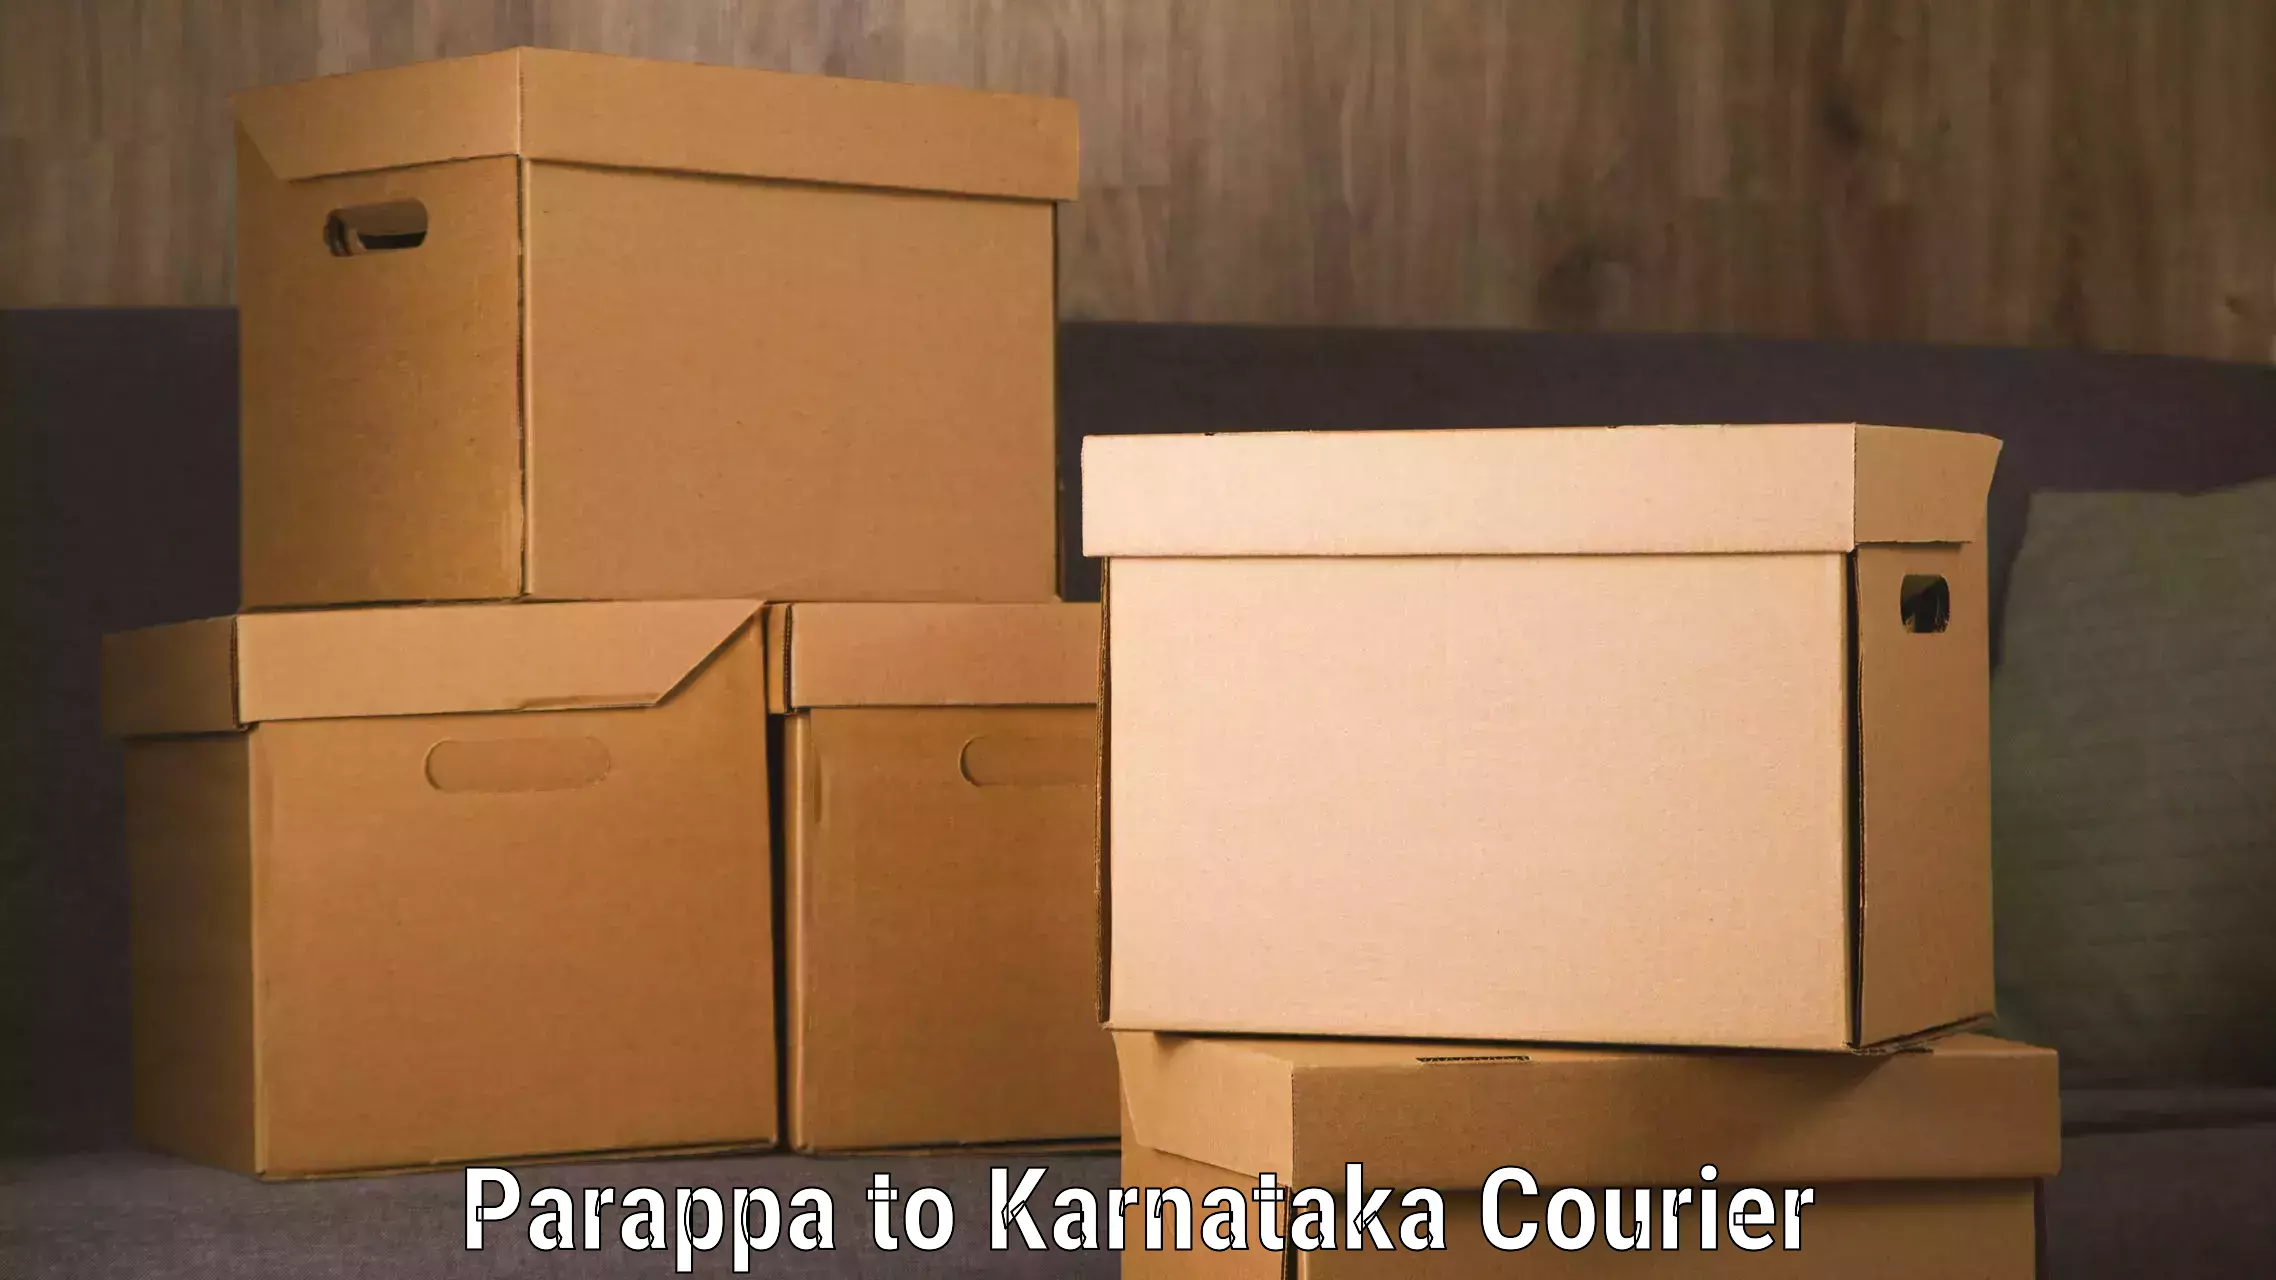 Rural area delivery Parappa to Tumkur